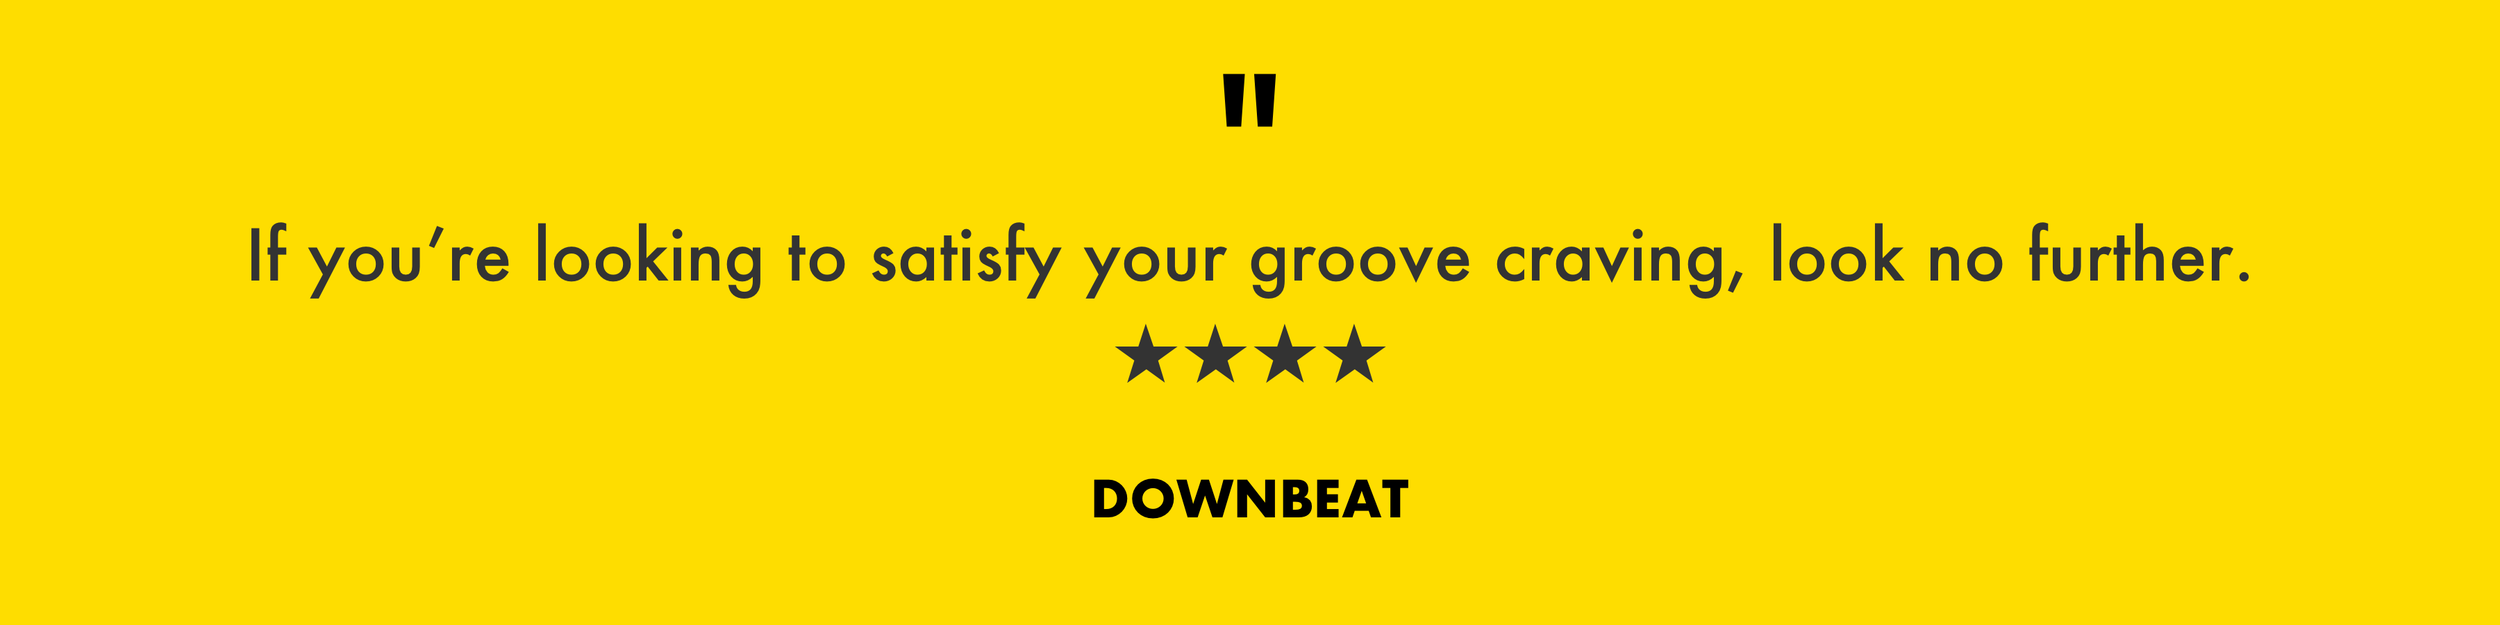 Quote_Downbeat-yellow.png